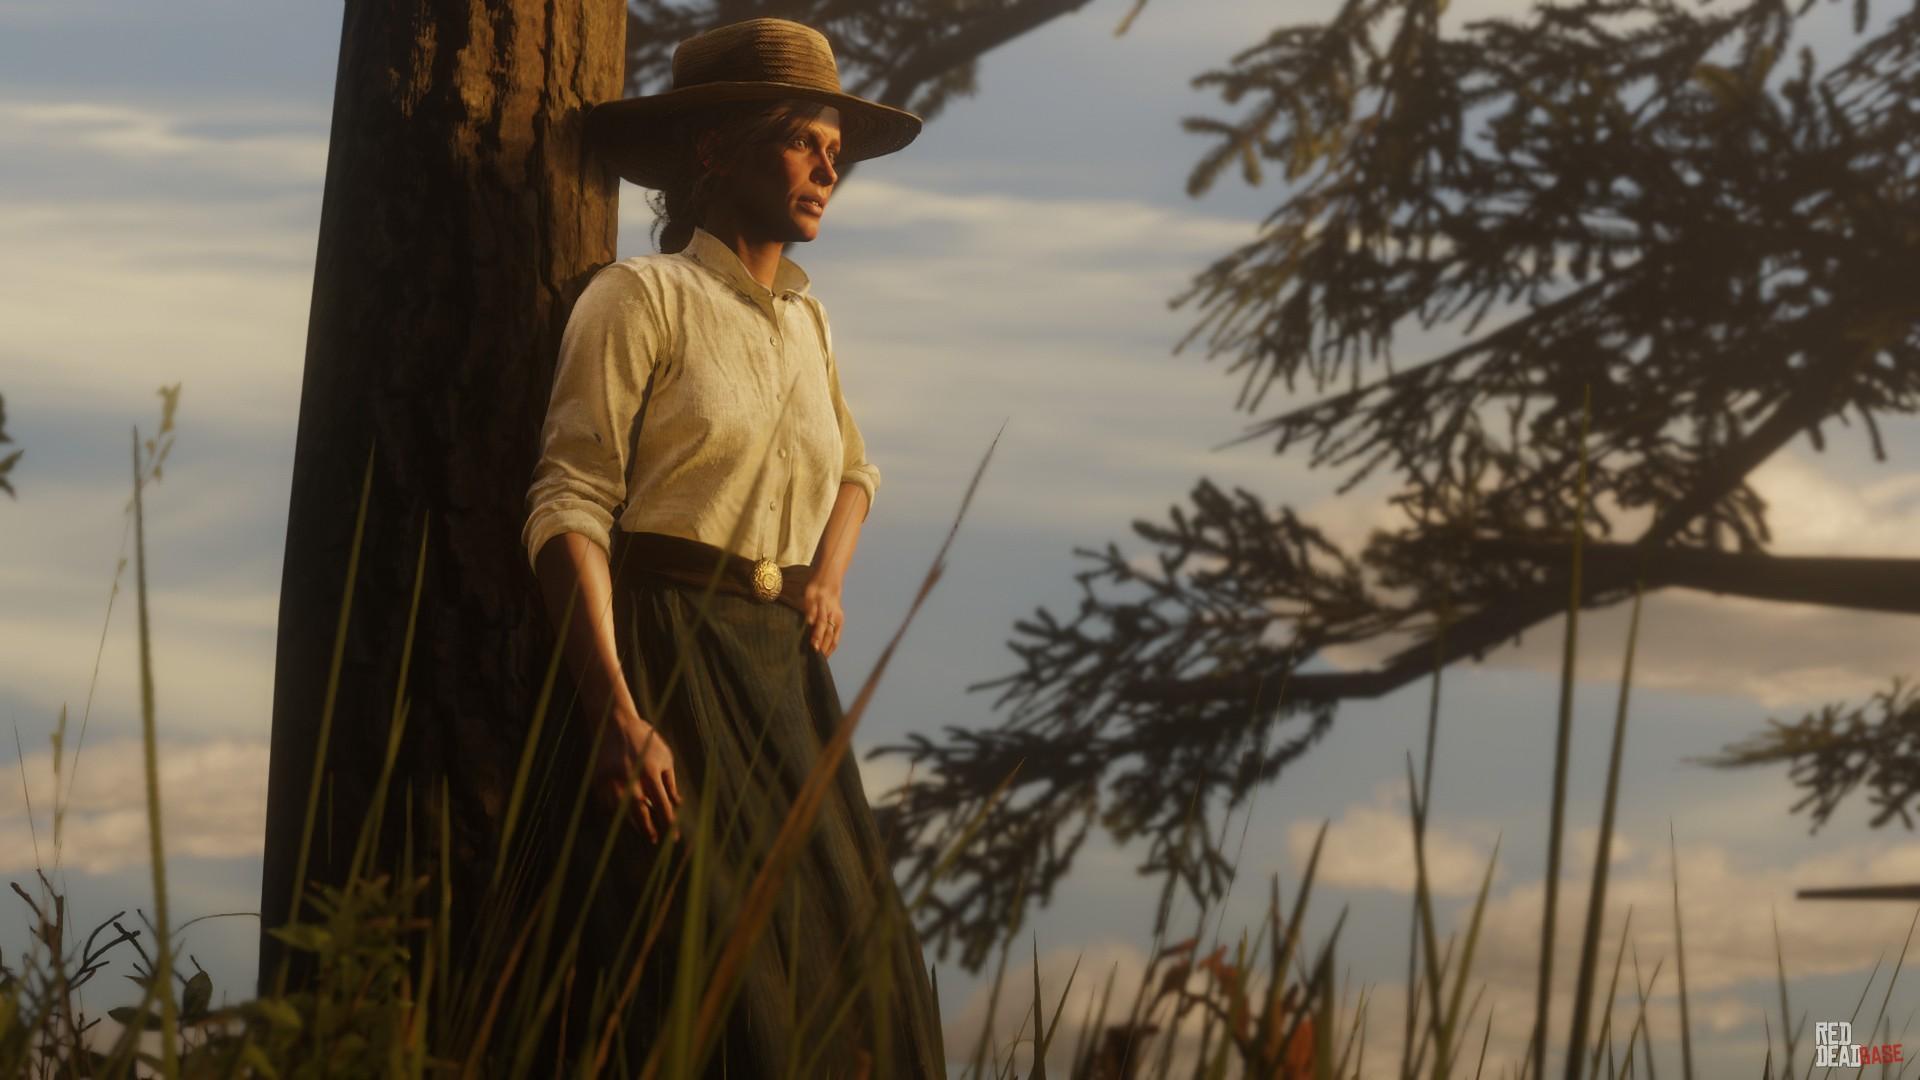 Sadie Adler Red Dead Redemption 2 Characters Red Dead Redemption 2